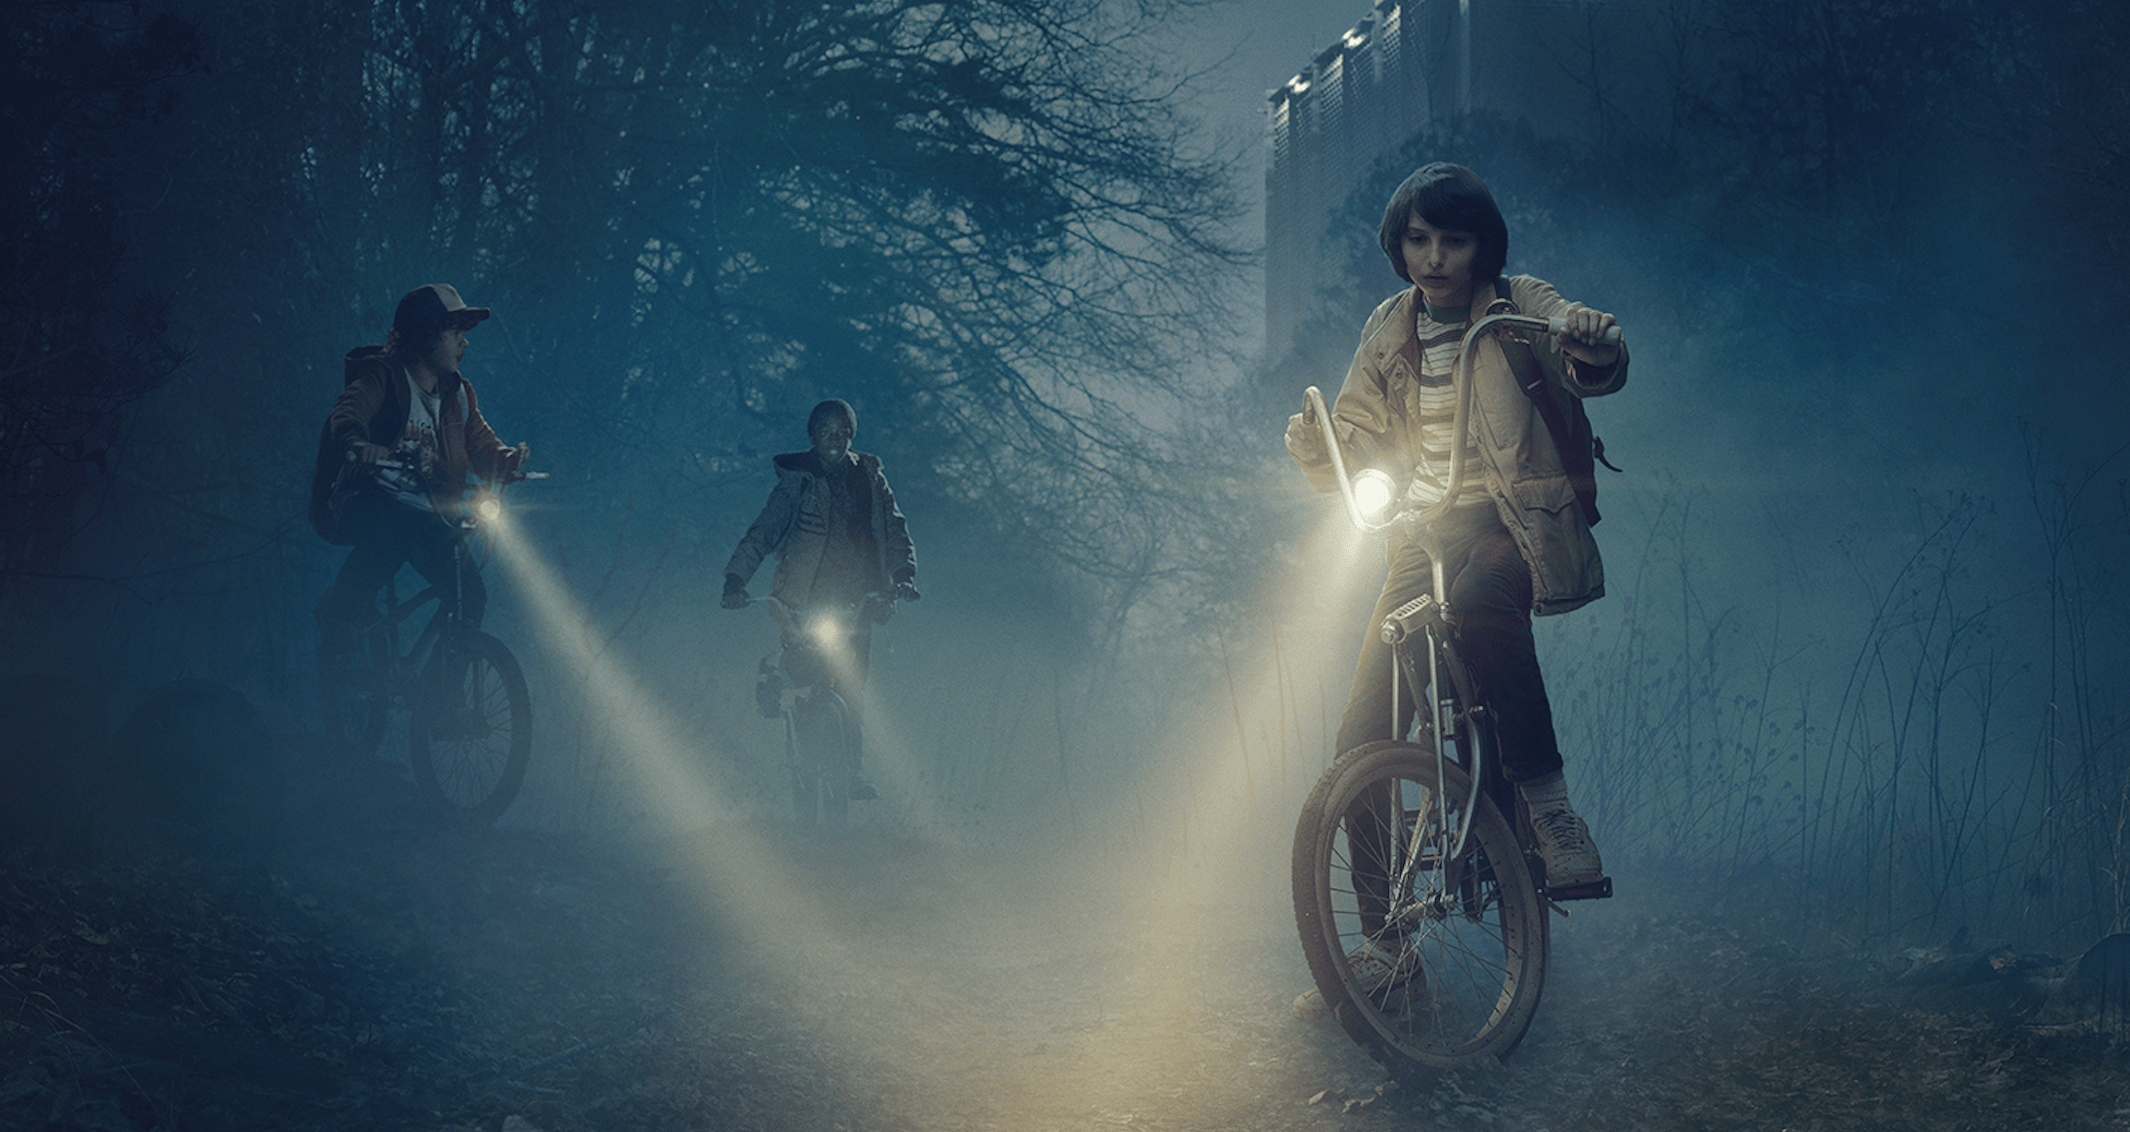 Three boys on bikes in a dark forest with one boy giving a thumbs up. - Netflix